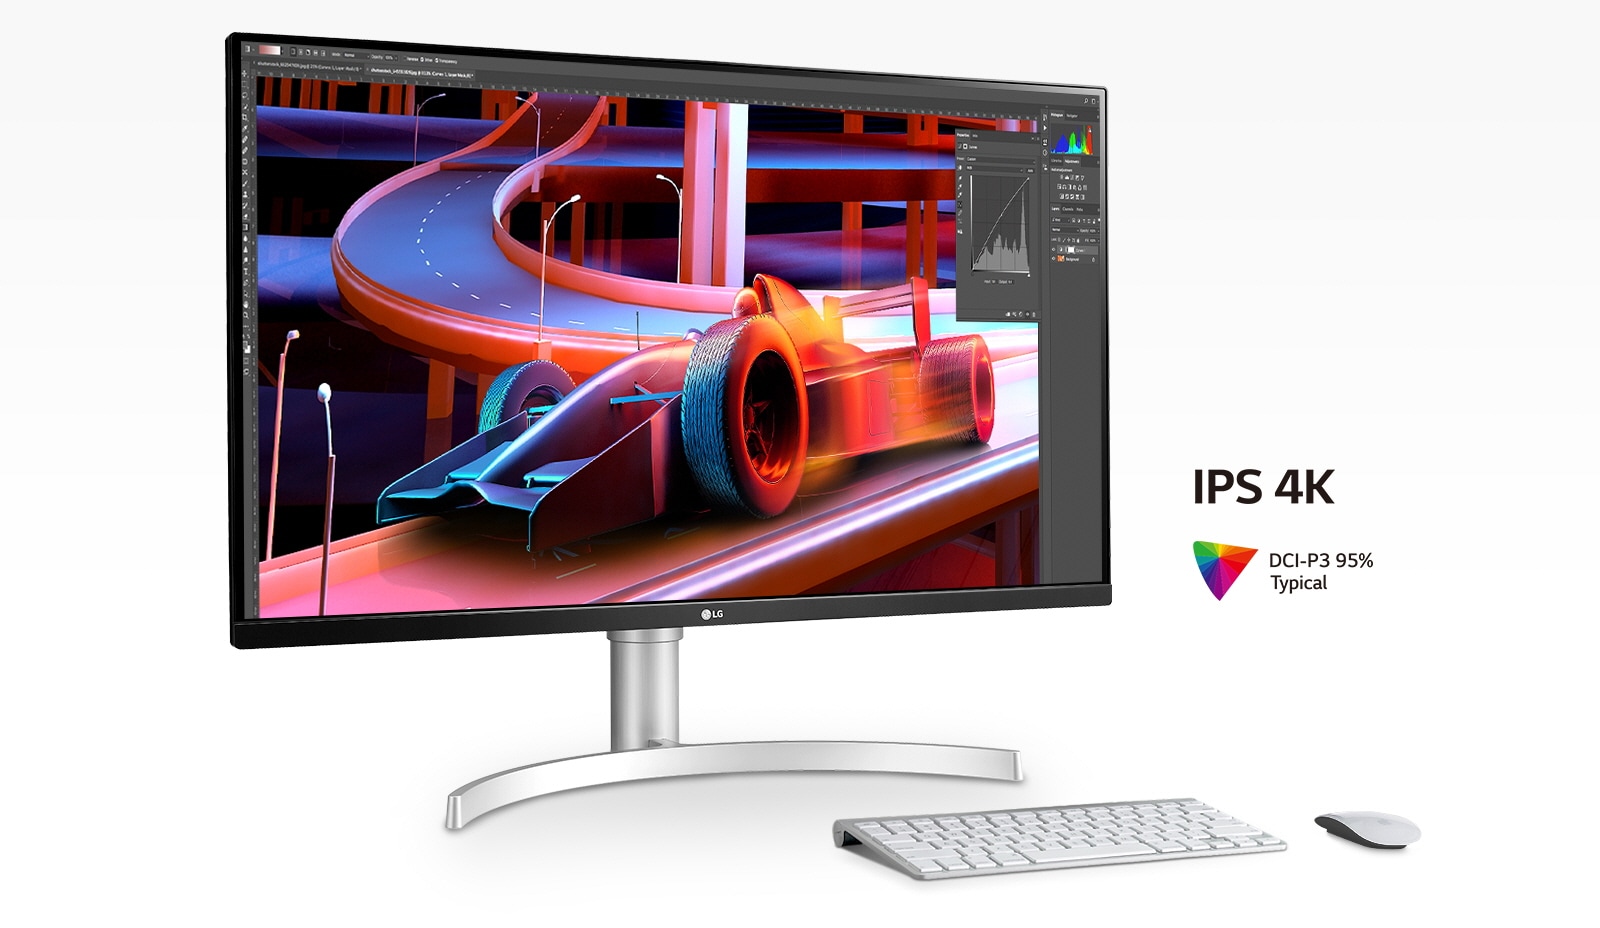 IPS 4K, and DCI-P3 95% (Typ.) for suitable clarity, precision and color expression